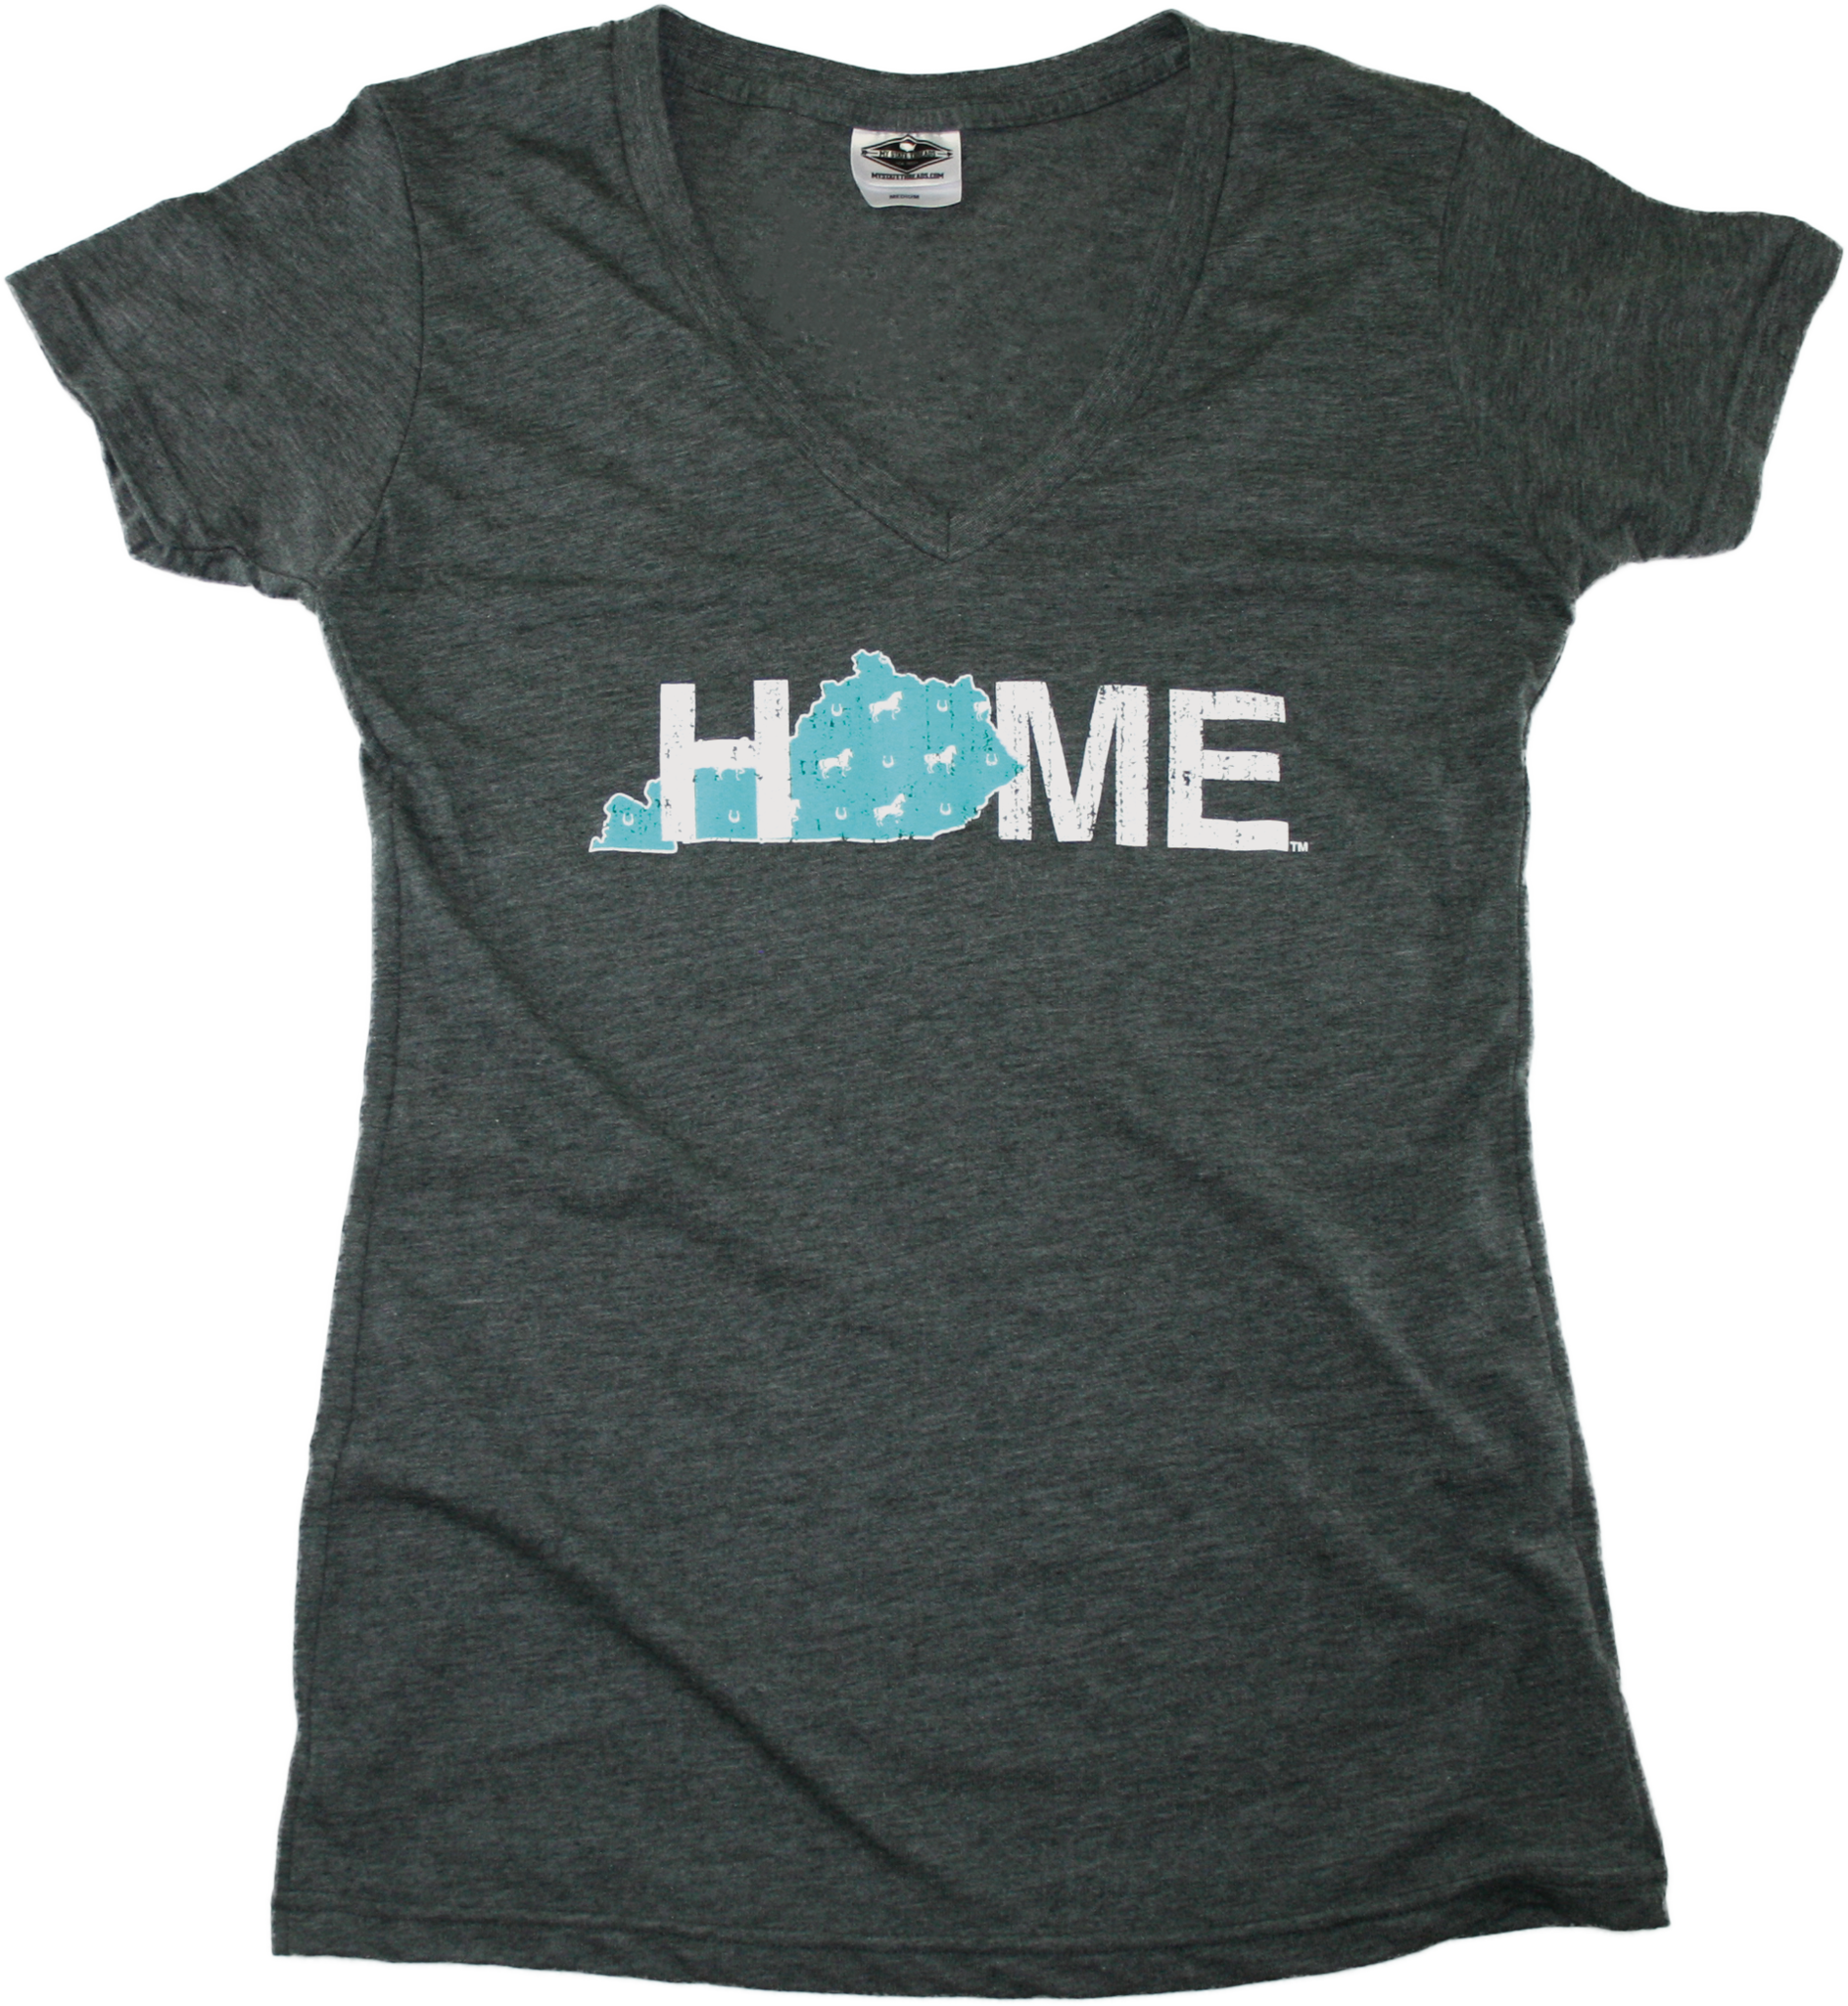 KENTUCKY LADIES V-NECK | HOME | HORSE PATTERN - My State Threads